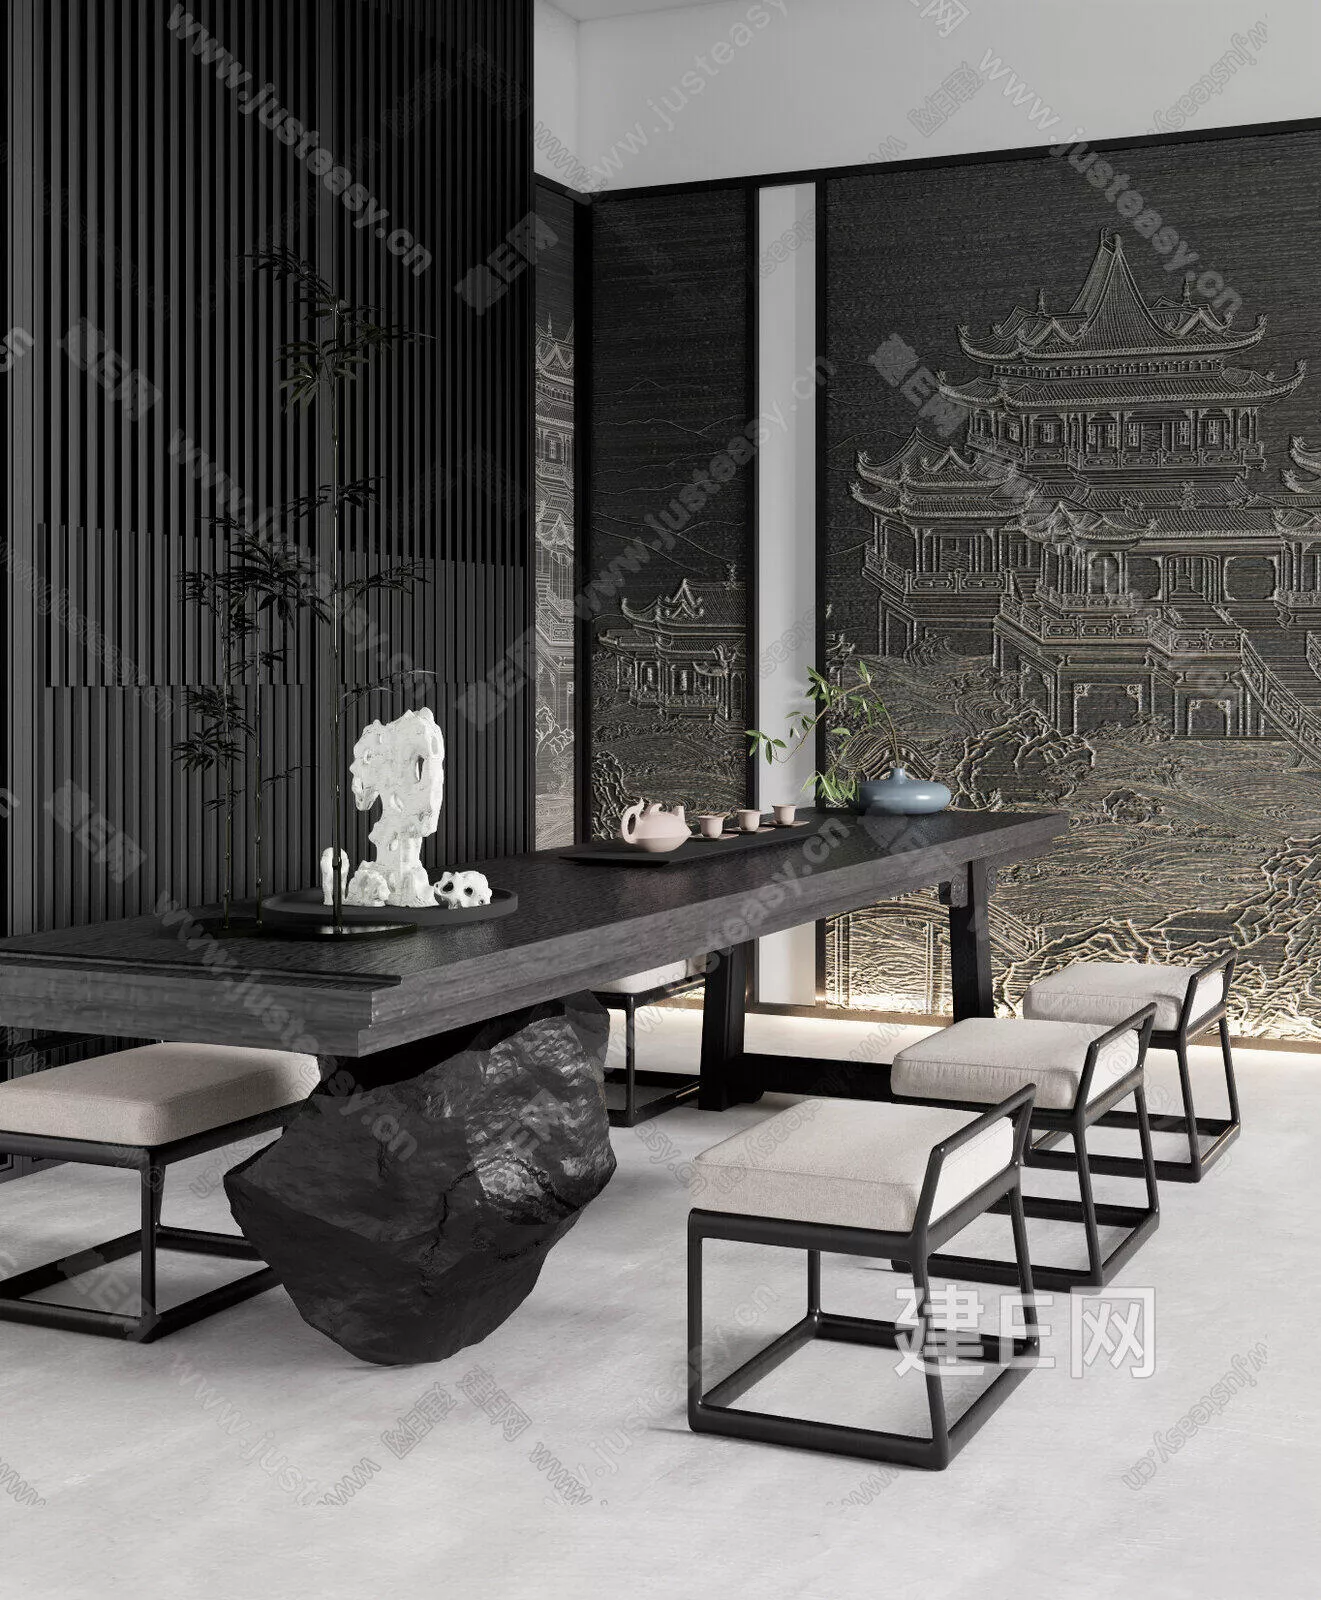 CHINESE TEAROOM - SKETCHUP 3D SCENE - ENSCAPE - 100682227